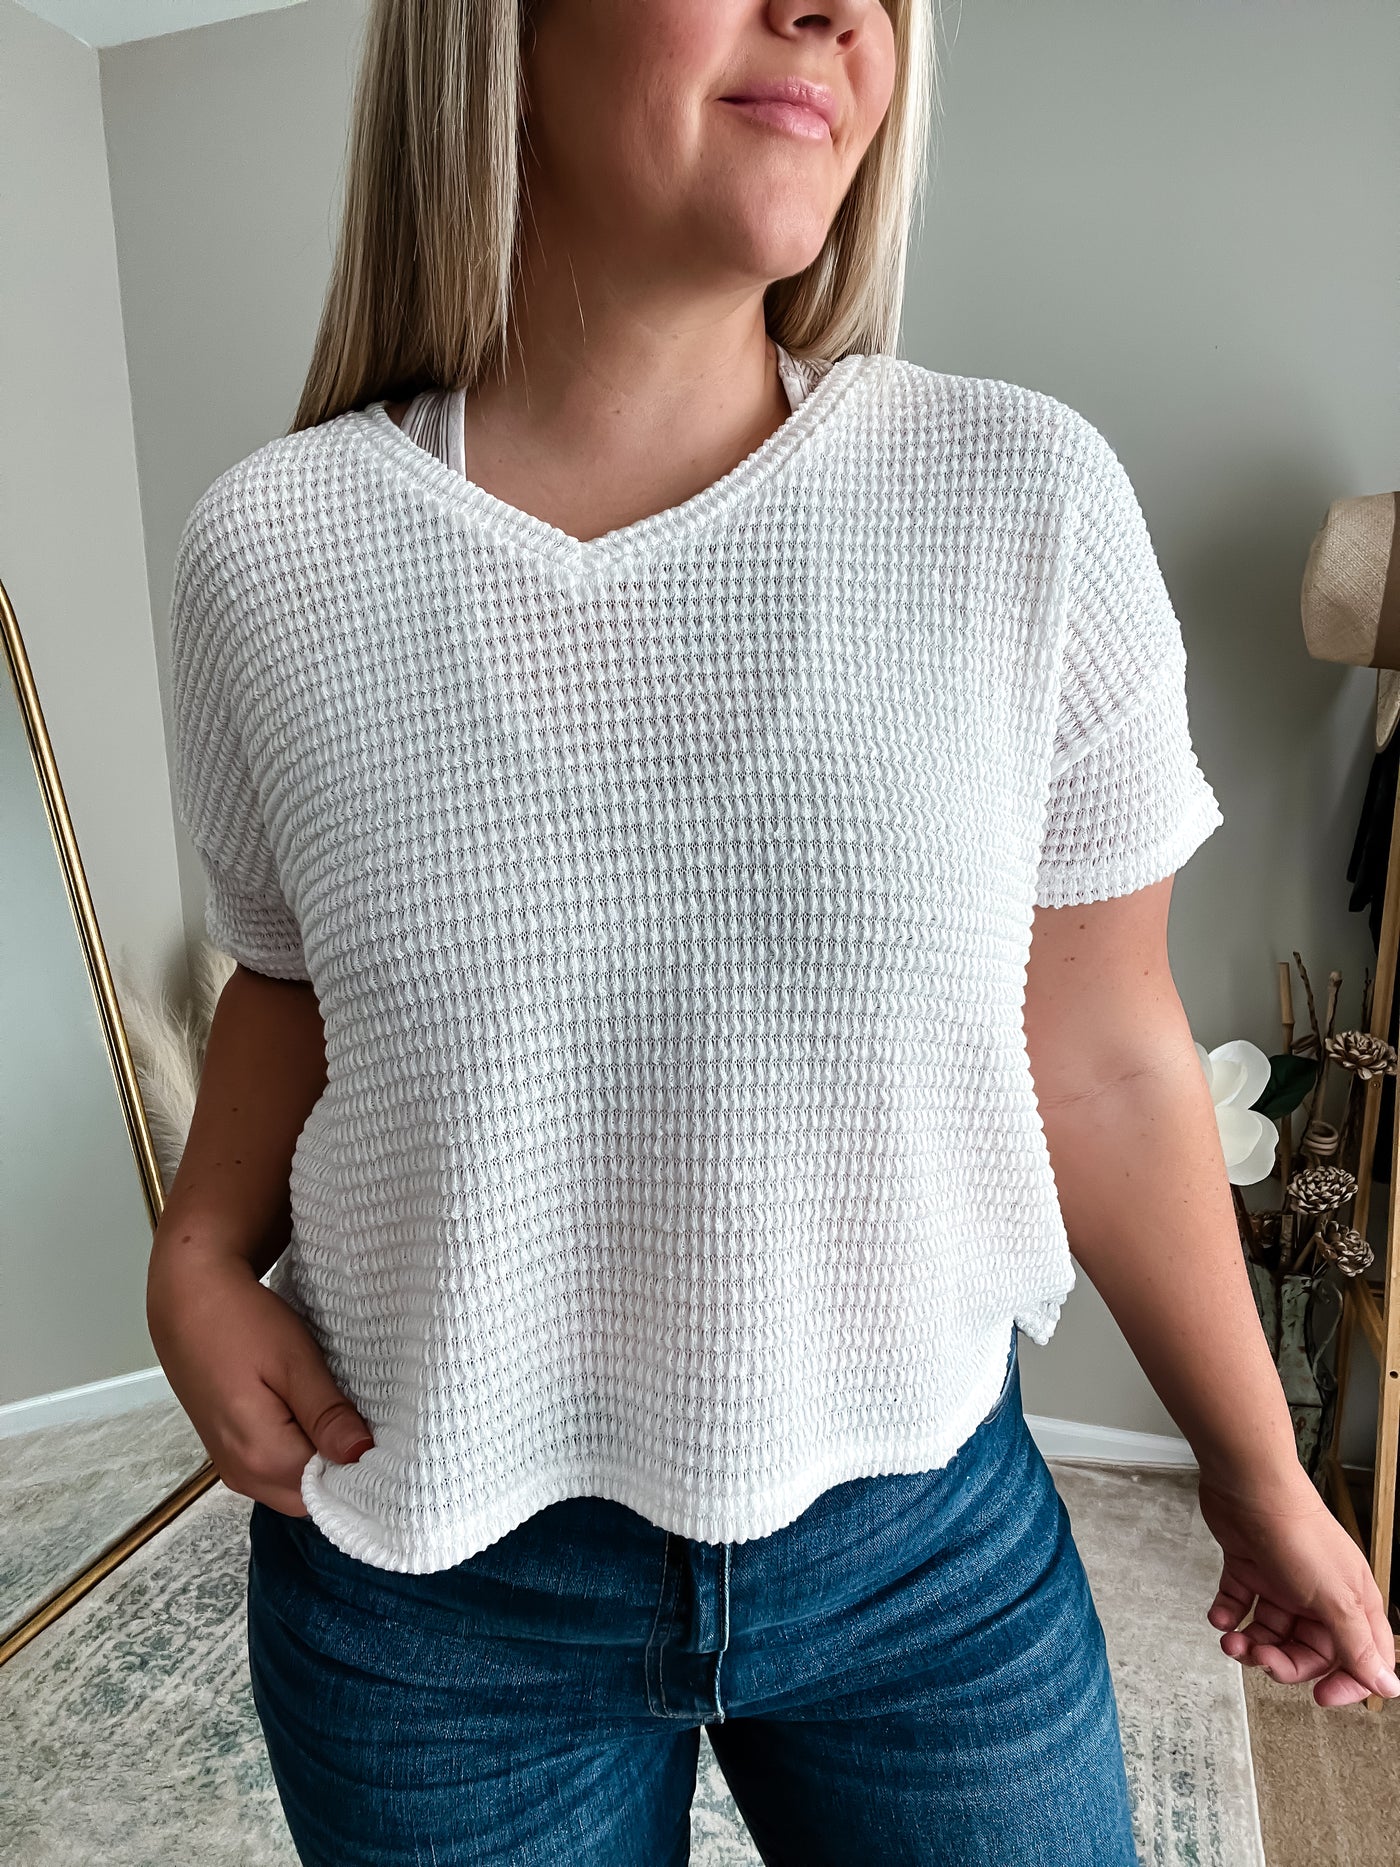 Just the Beginning Jacquard Top